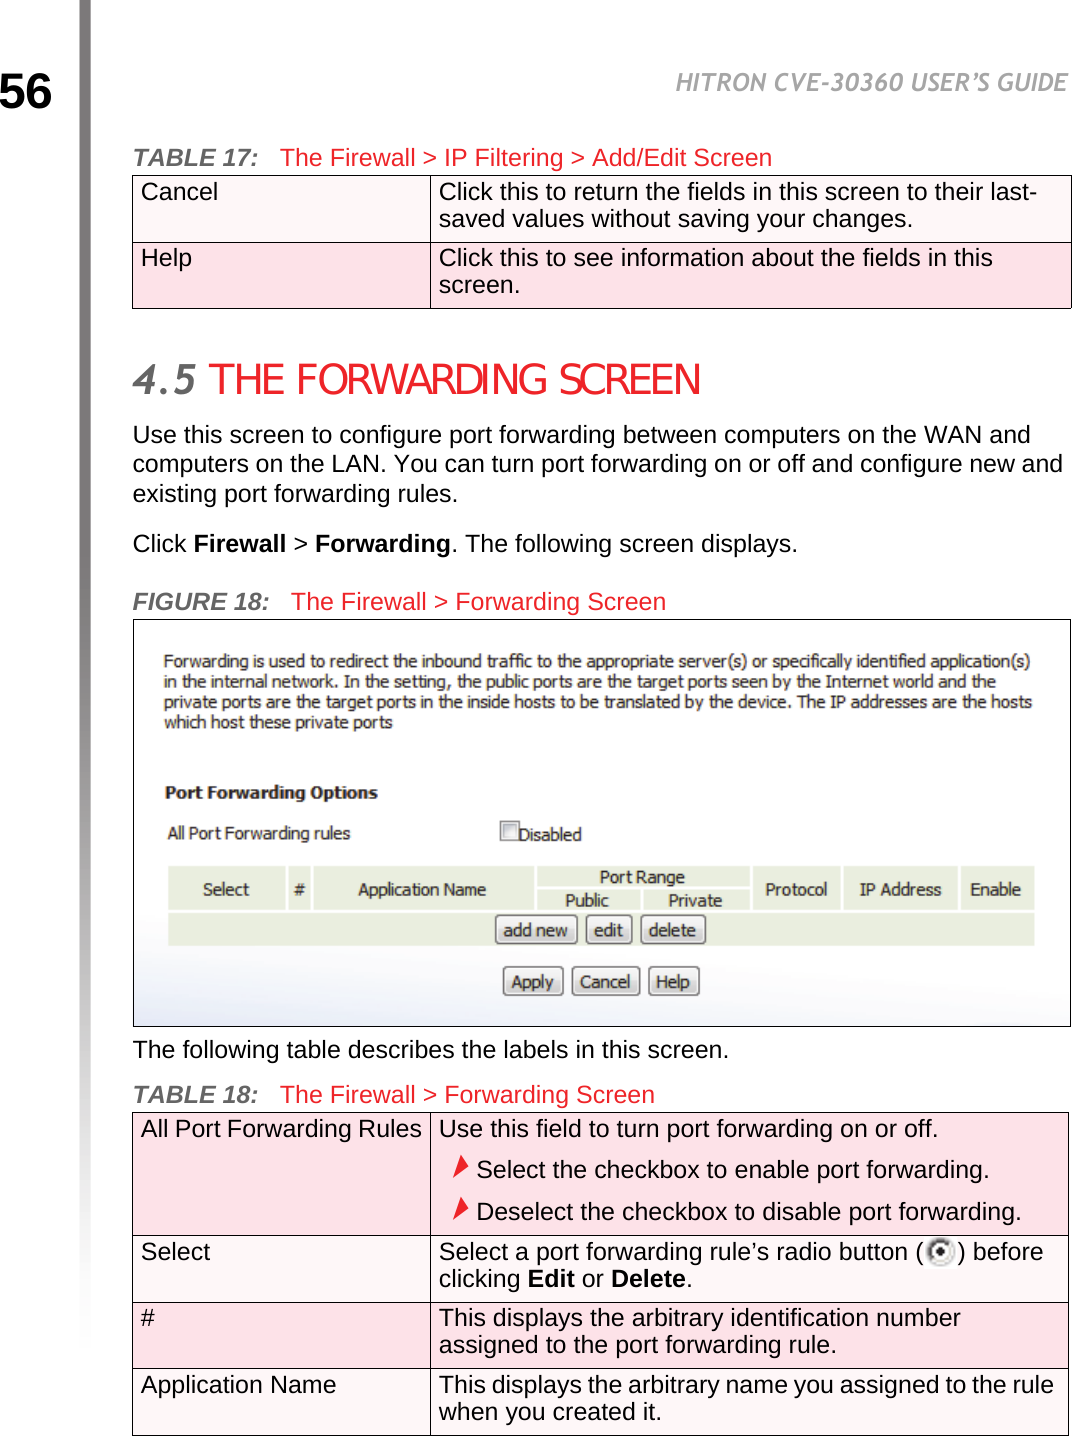 56HITRON CVE-30360 USER’S GUIDEFIREWALL4.5 THE FORWARDING SCREENUse this screen to configure port forwarding between computers on the WAN and computers on the LAN. You can turn port forwarding on or off and configure new and existing port forwarding rules.Click Firewall &gt; Forwarding. The following screen displays.FIGURE 18:   The Firewall &gt; Forwarding ScreenThe following table describes the labels in this screen.Cancel Click this to return the fields in this screen to their last-saved values without saving your changes.Help Click this to see information about the fields in this screen.TABLE 18:   The Firewall &gt; Forwarding Screen All Port Forwarding Rules Use this field to turn port forwarding on or off.Select the checkbox to enable port forwarding.Deselect the checkbox to disable port forwarding.Select Select a port forwarding rule’s radio button ( ) before clicking Edit or Delete.#This displays the arbitrary identification number assigned to the port forwarding rule.Application Name This displays the arbitrary name you assigned to the rule when you created it.TABLE 17:   The Firewall &gt; IP Filtering &gt; Add/Edit Screen